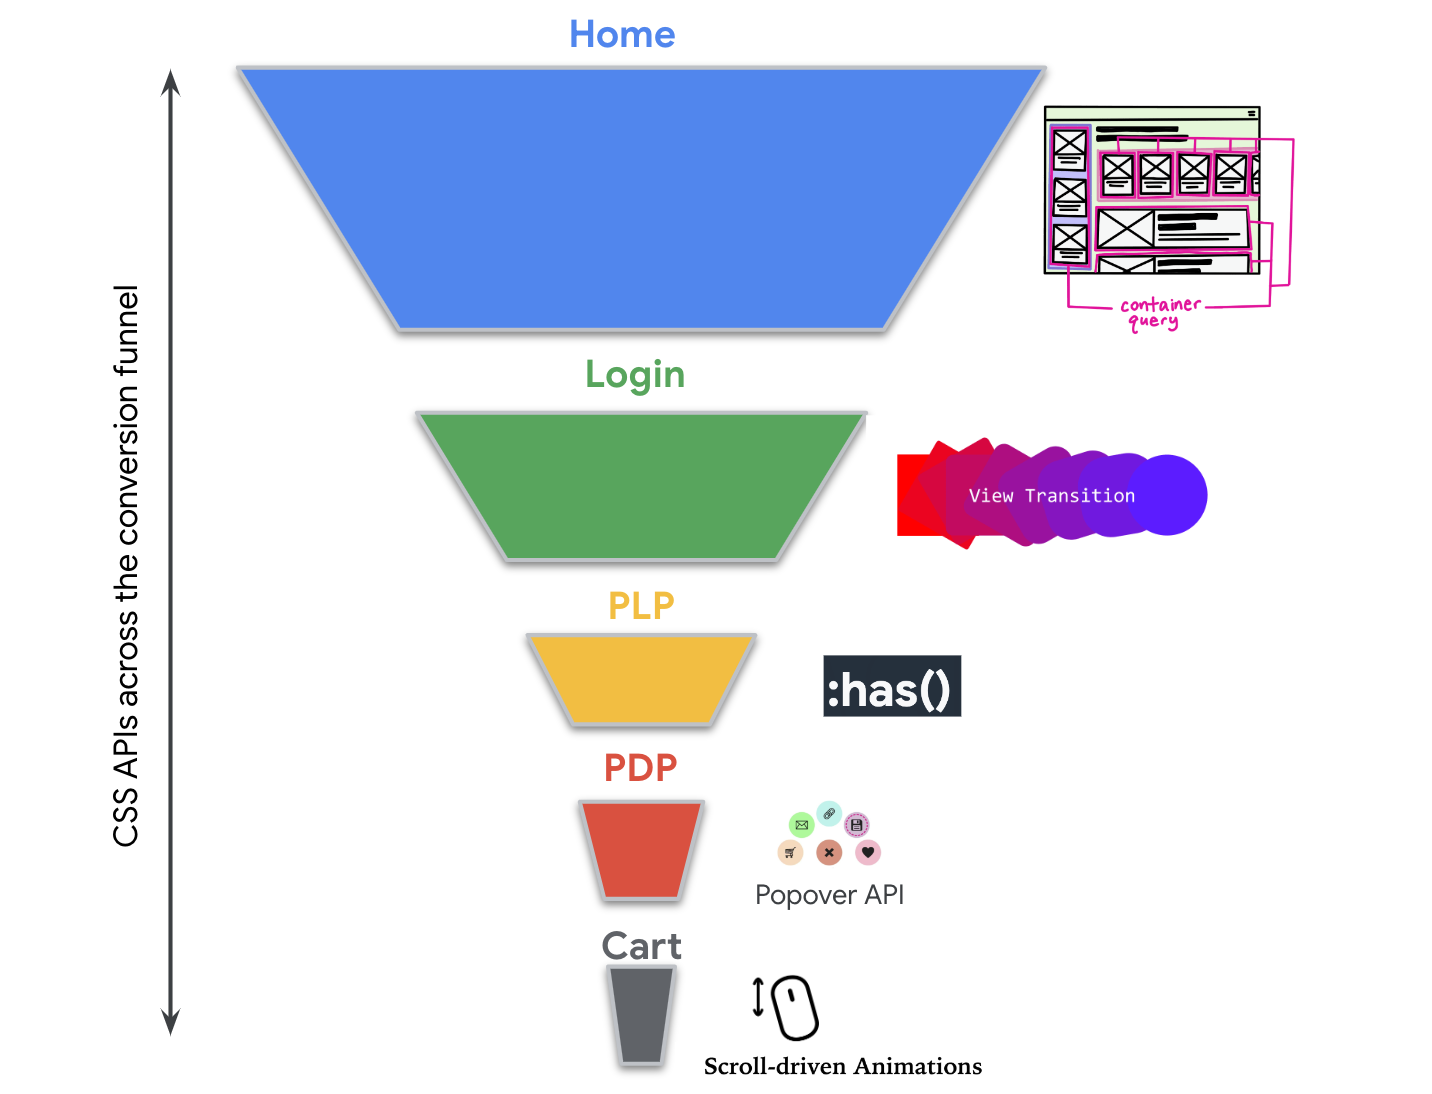 Conversion funnel combining CSS features.